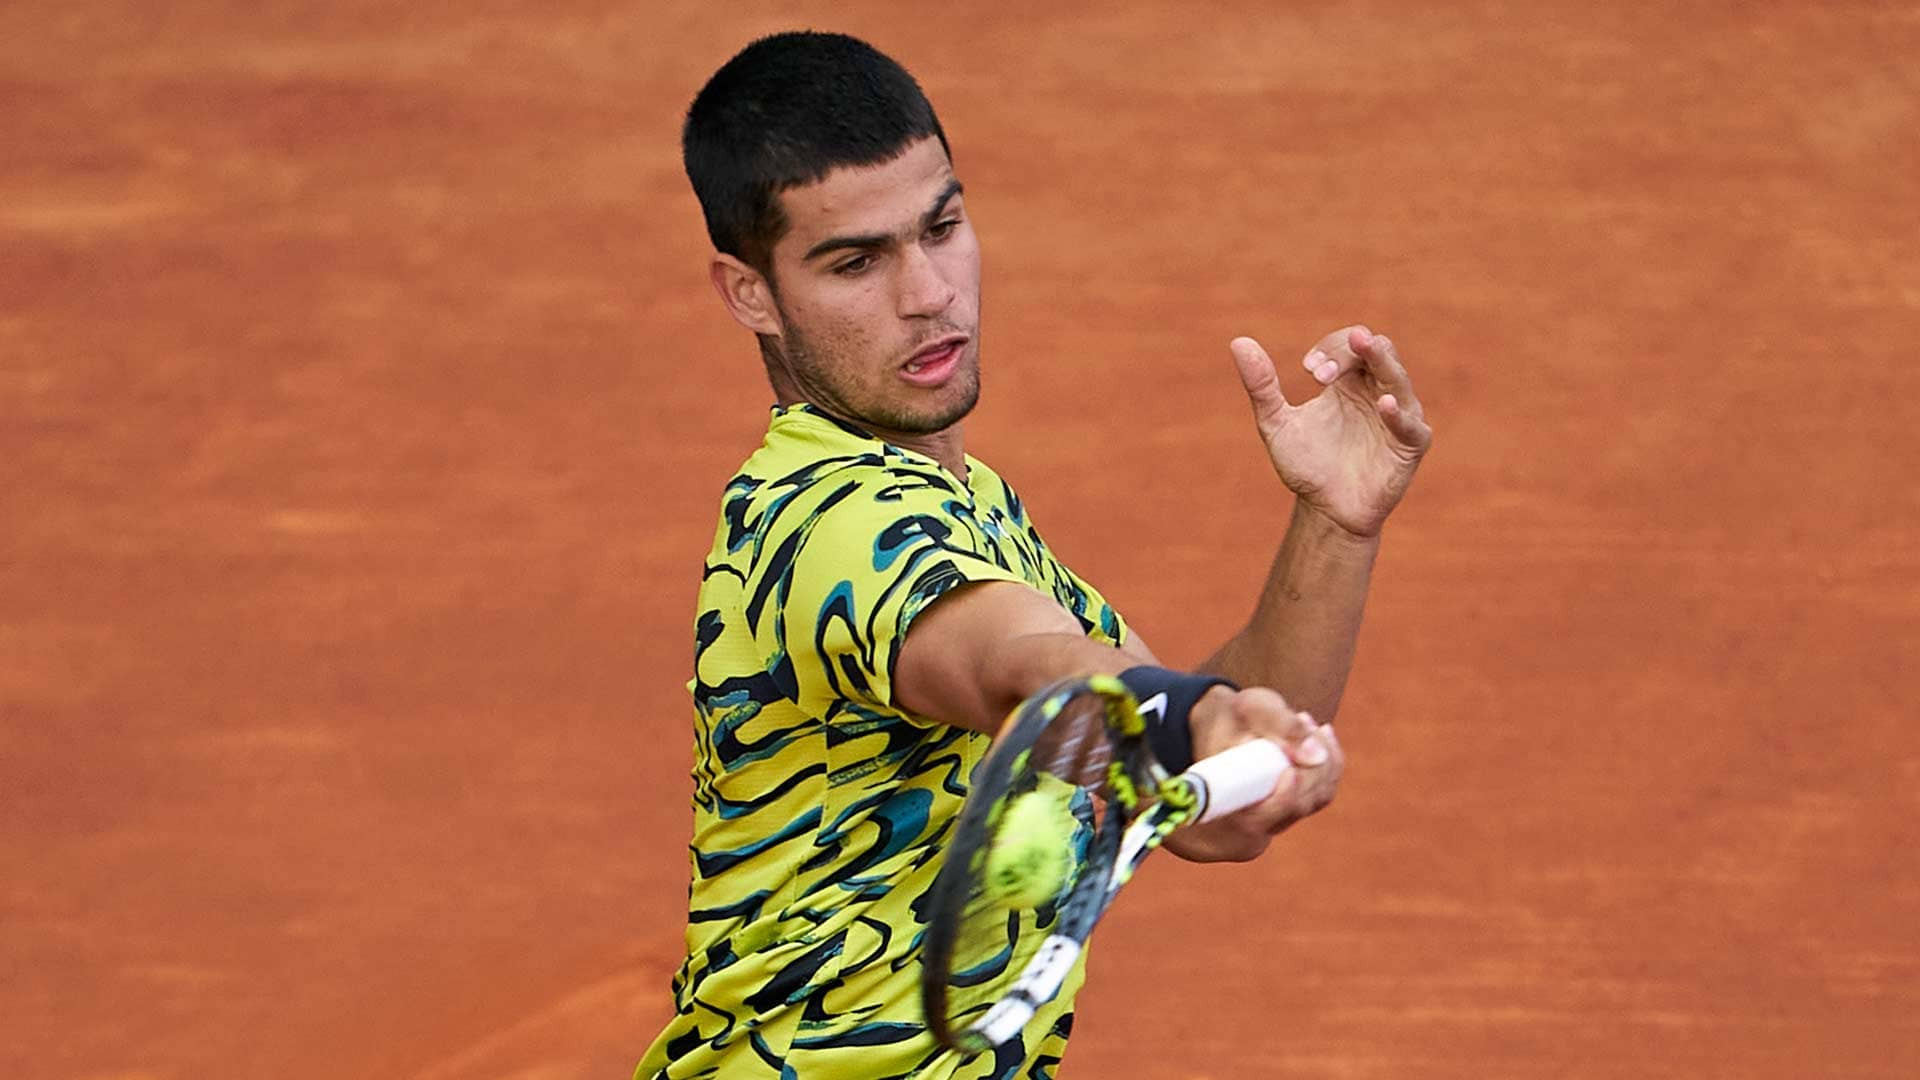 Alcaraz grinds past Bautista Agut in windy conditions